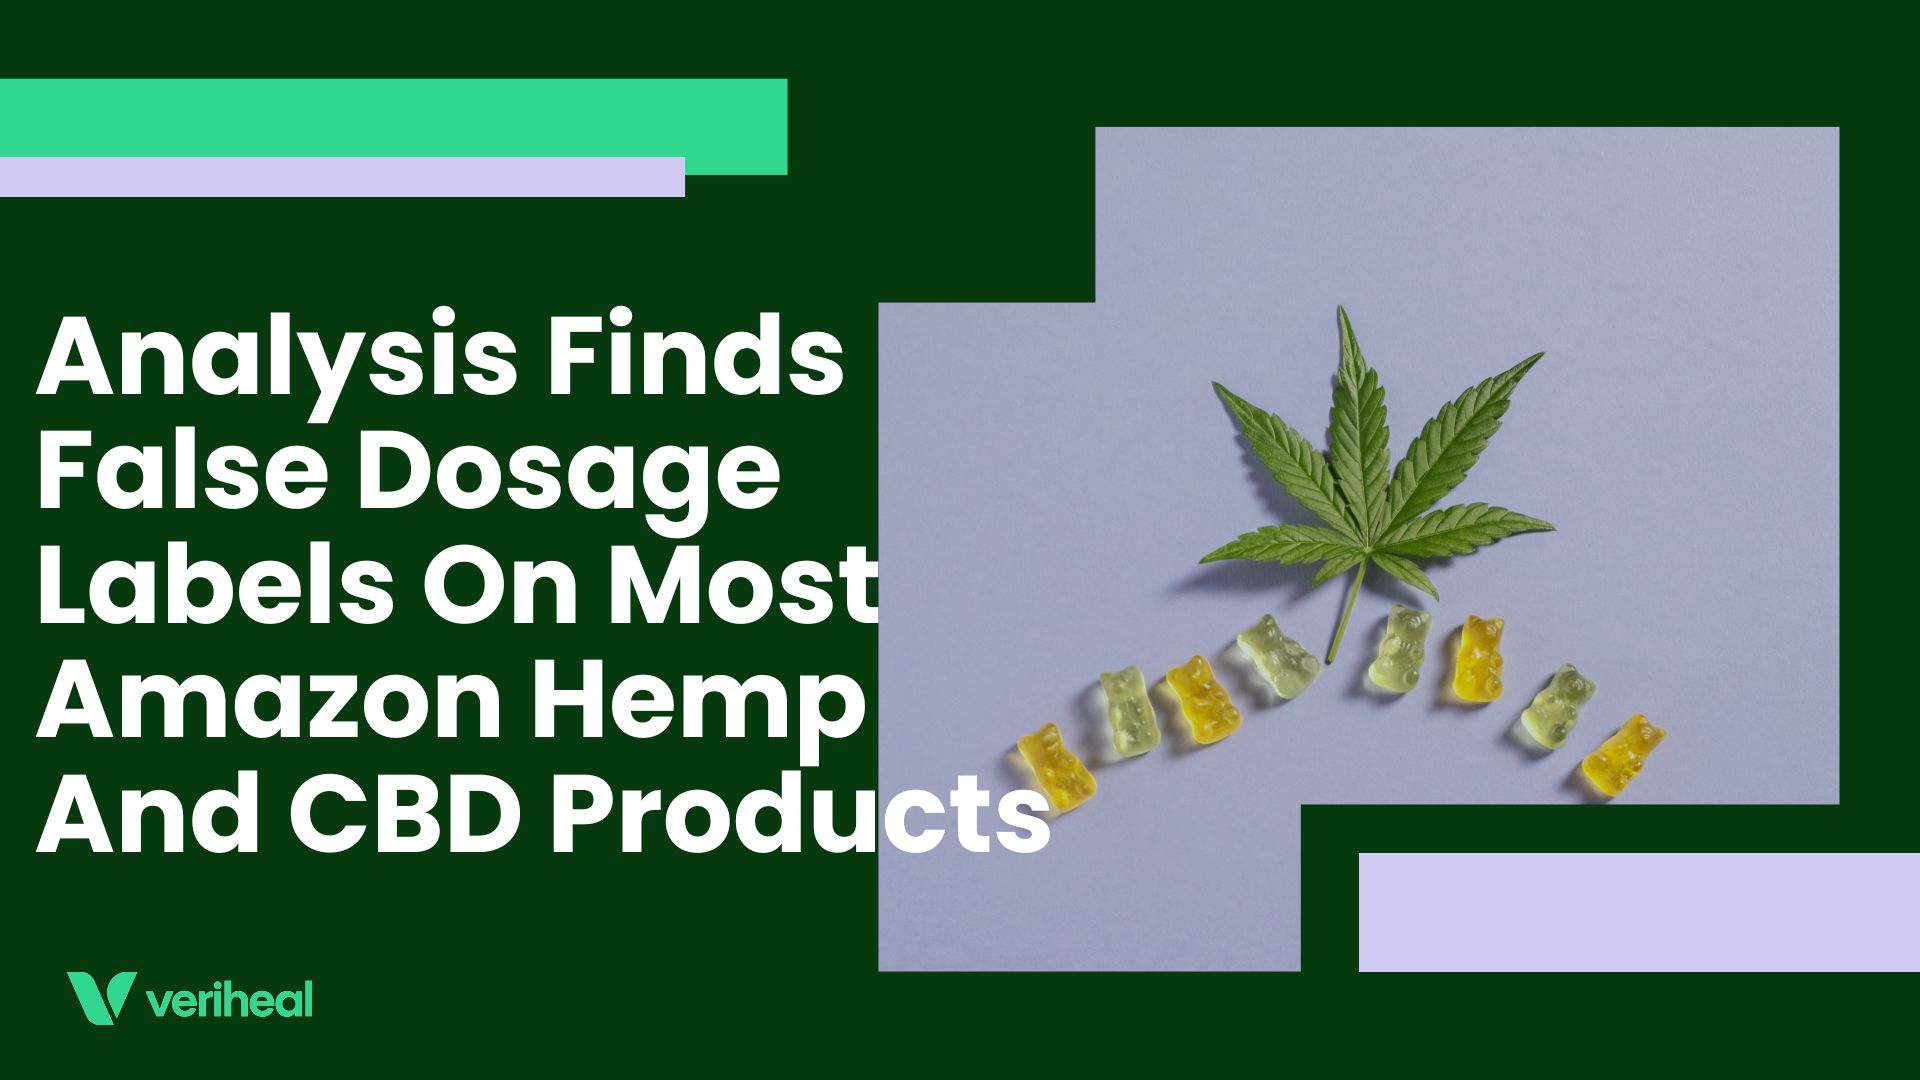 Analysis Finds False Dosage Labels On Most Amazon Hemp And CBD Products